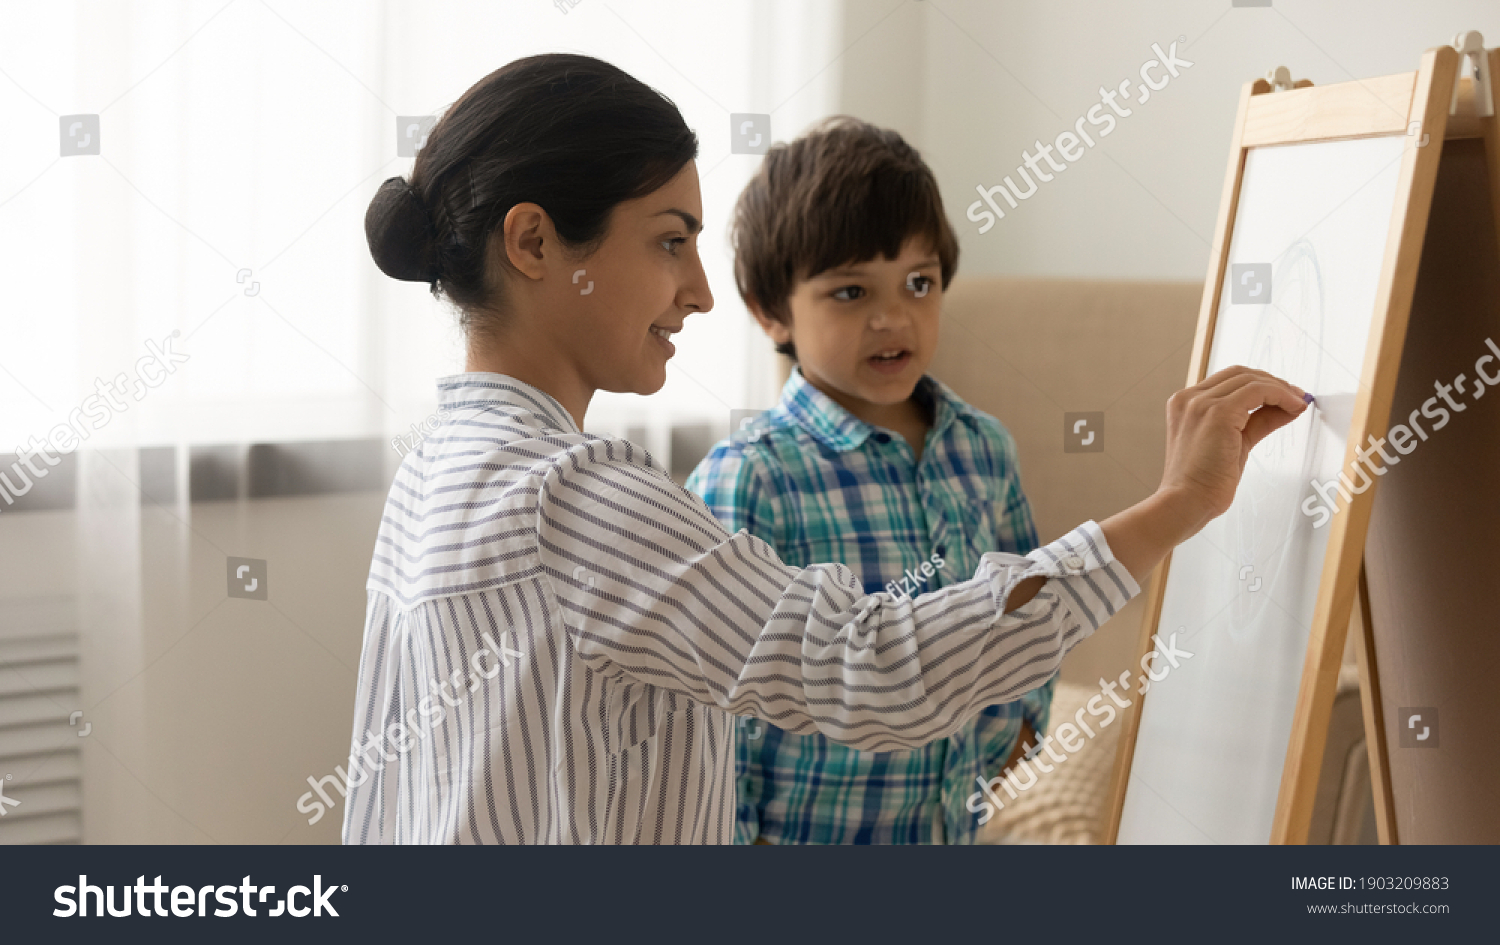 Attentive little indian boy preschooler take painting class from young millennial woman art teacher. Interested small child son watch inspired mother drawing picture on white board with colored chalks #1903209883